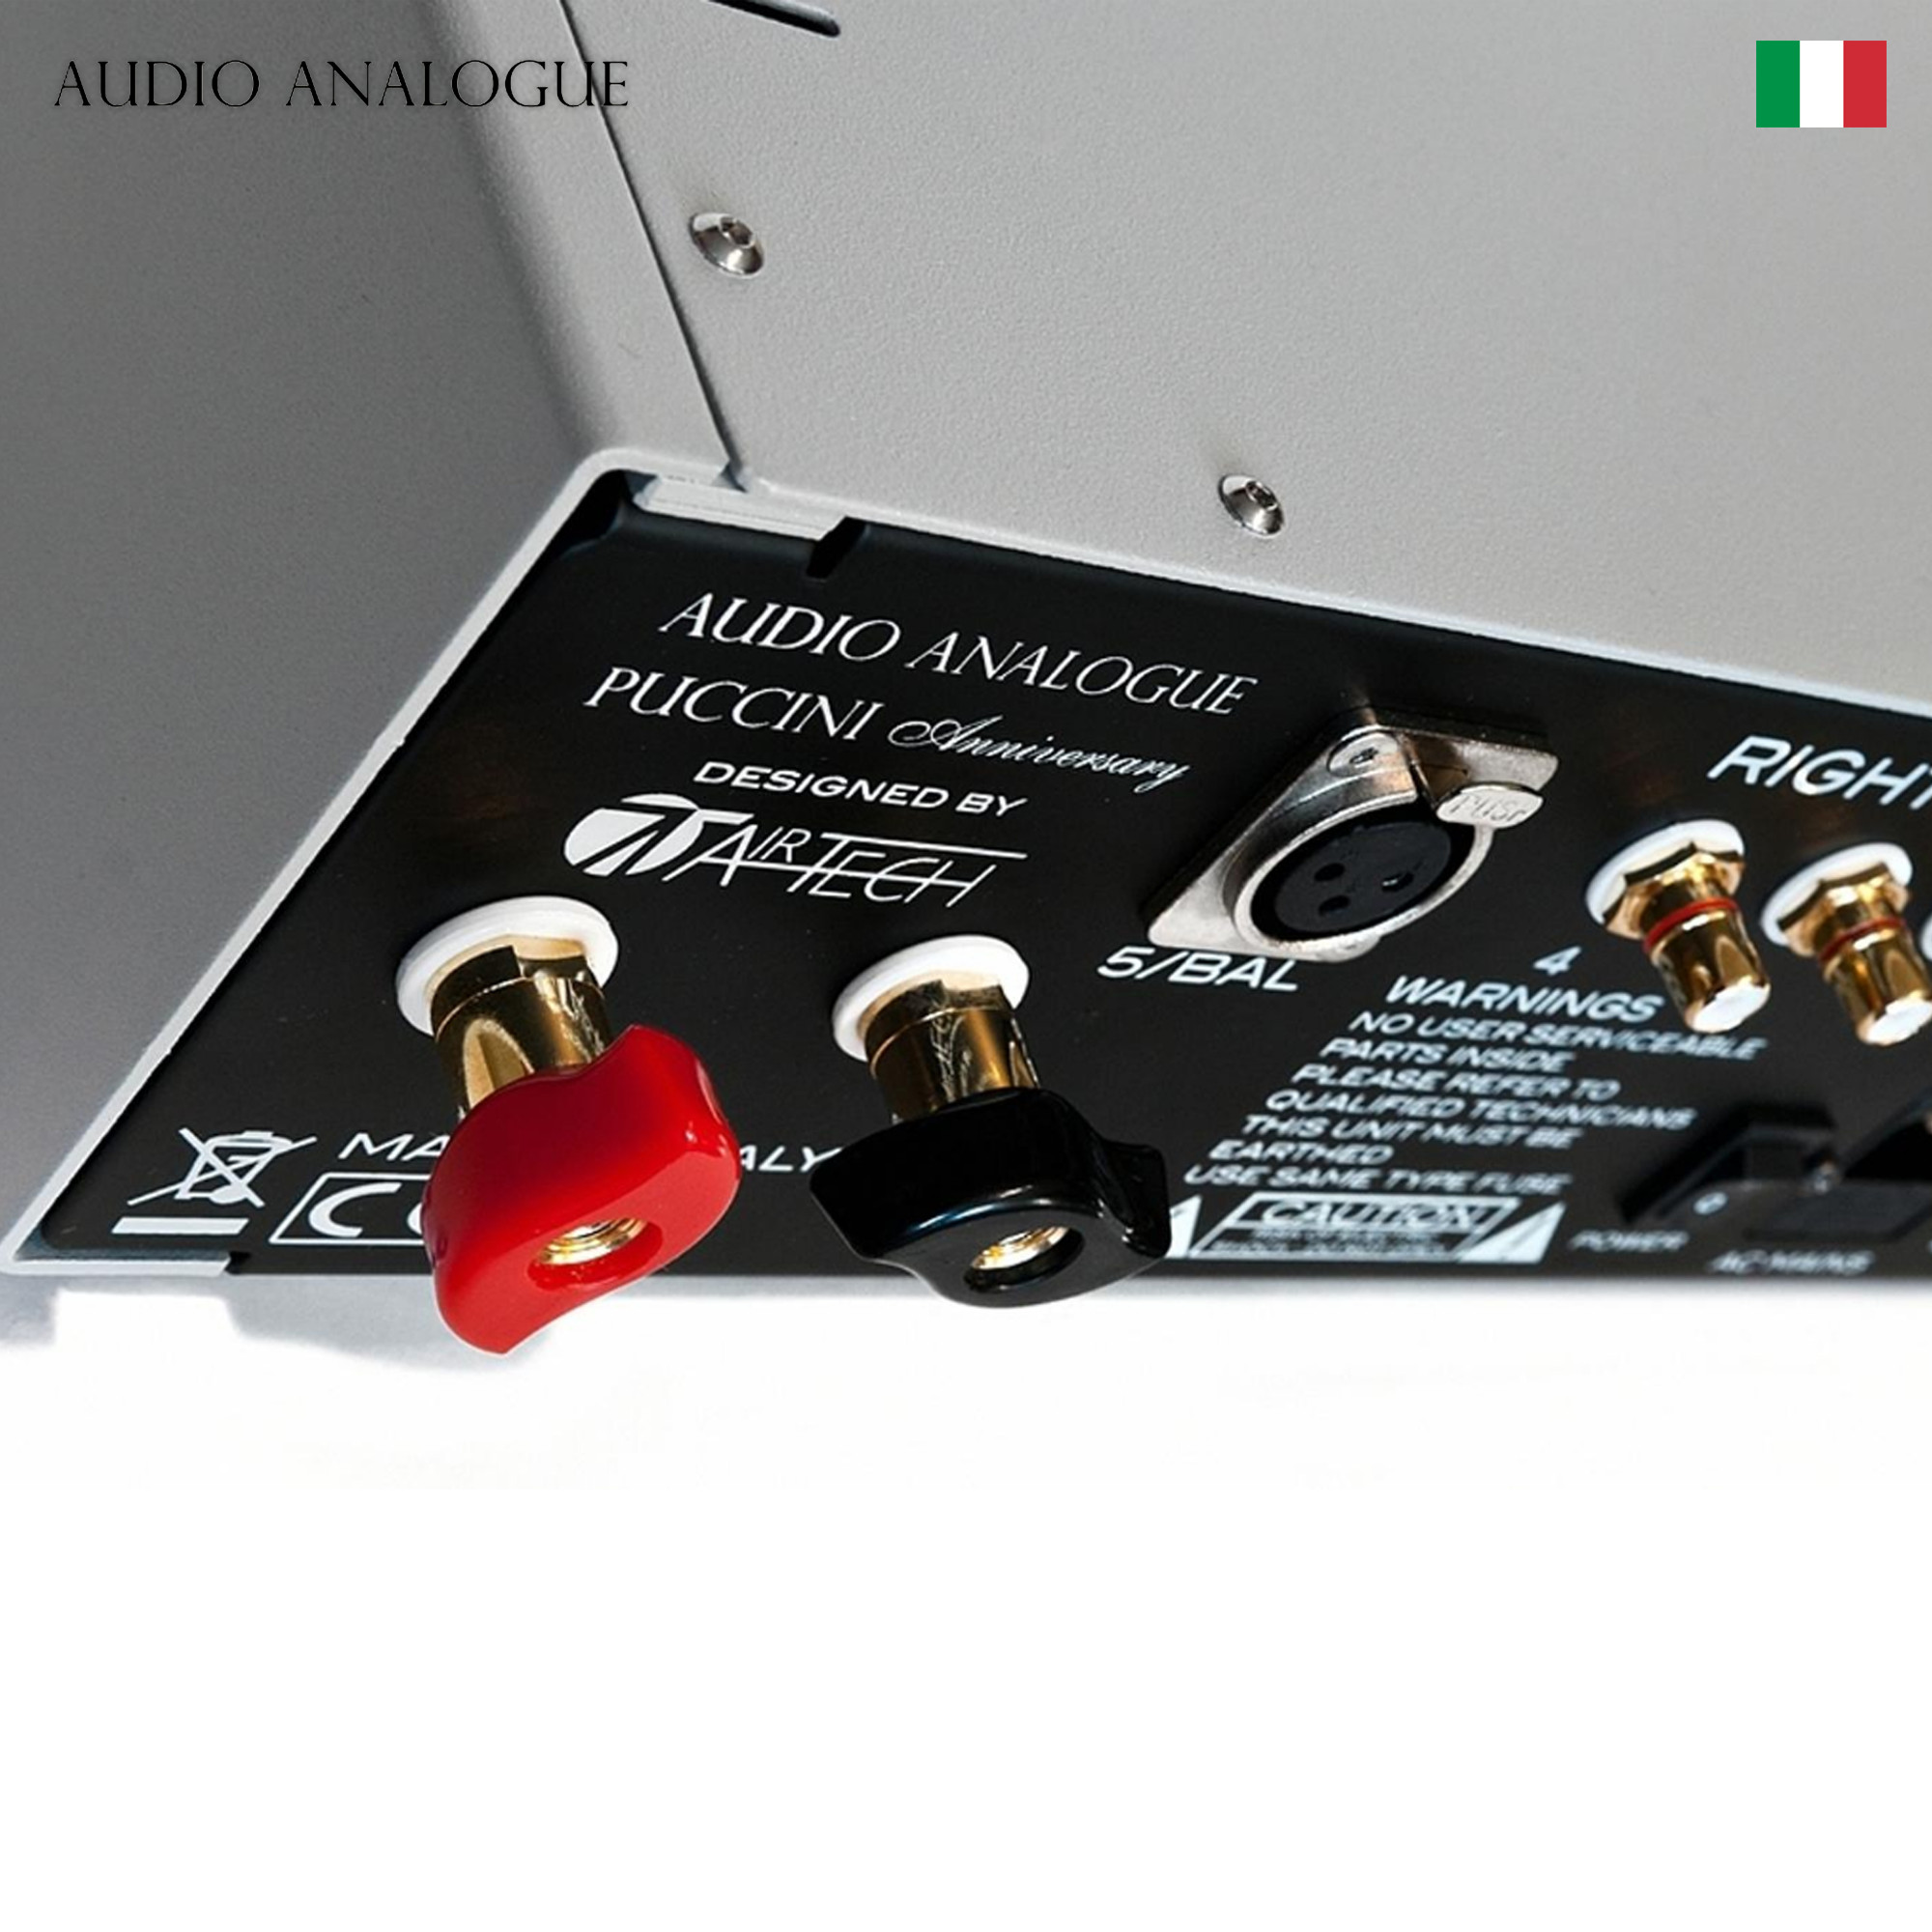 Amply Tích Hợp Audio Analogue Puccini Anniversary